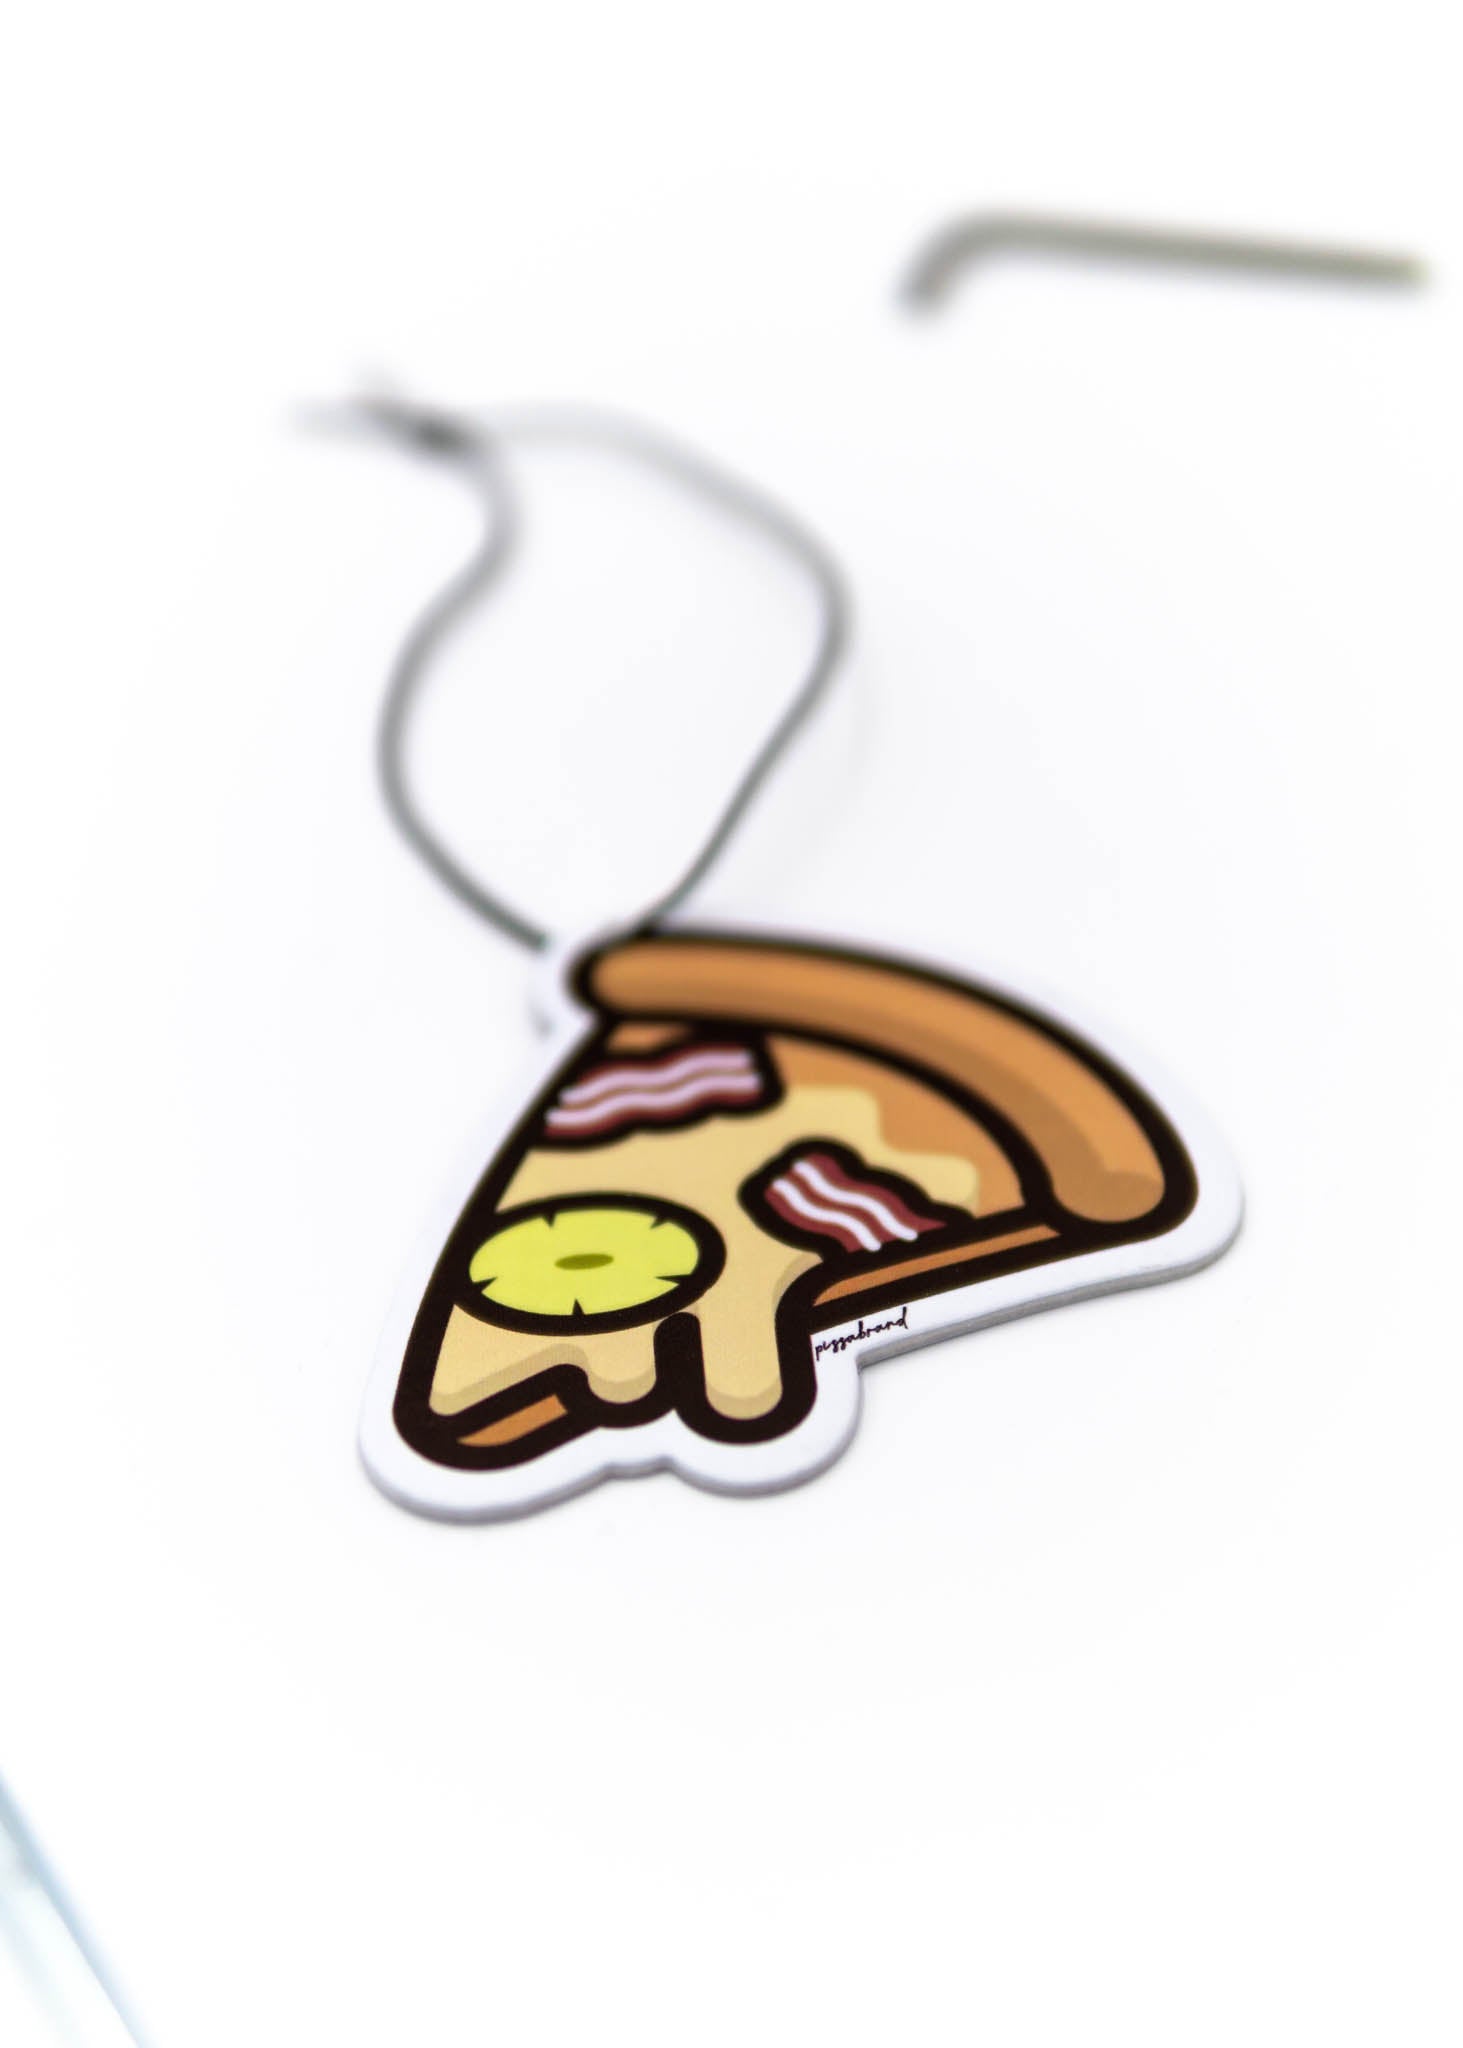 A pizzabrand pineapple and bacon pizza air freshener. Photo is a close up of the car air freshener with string.